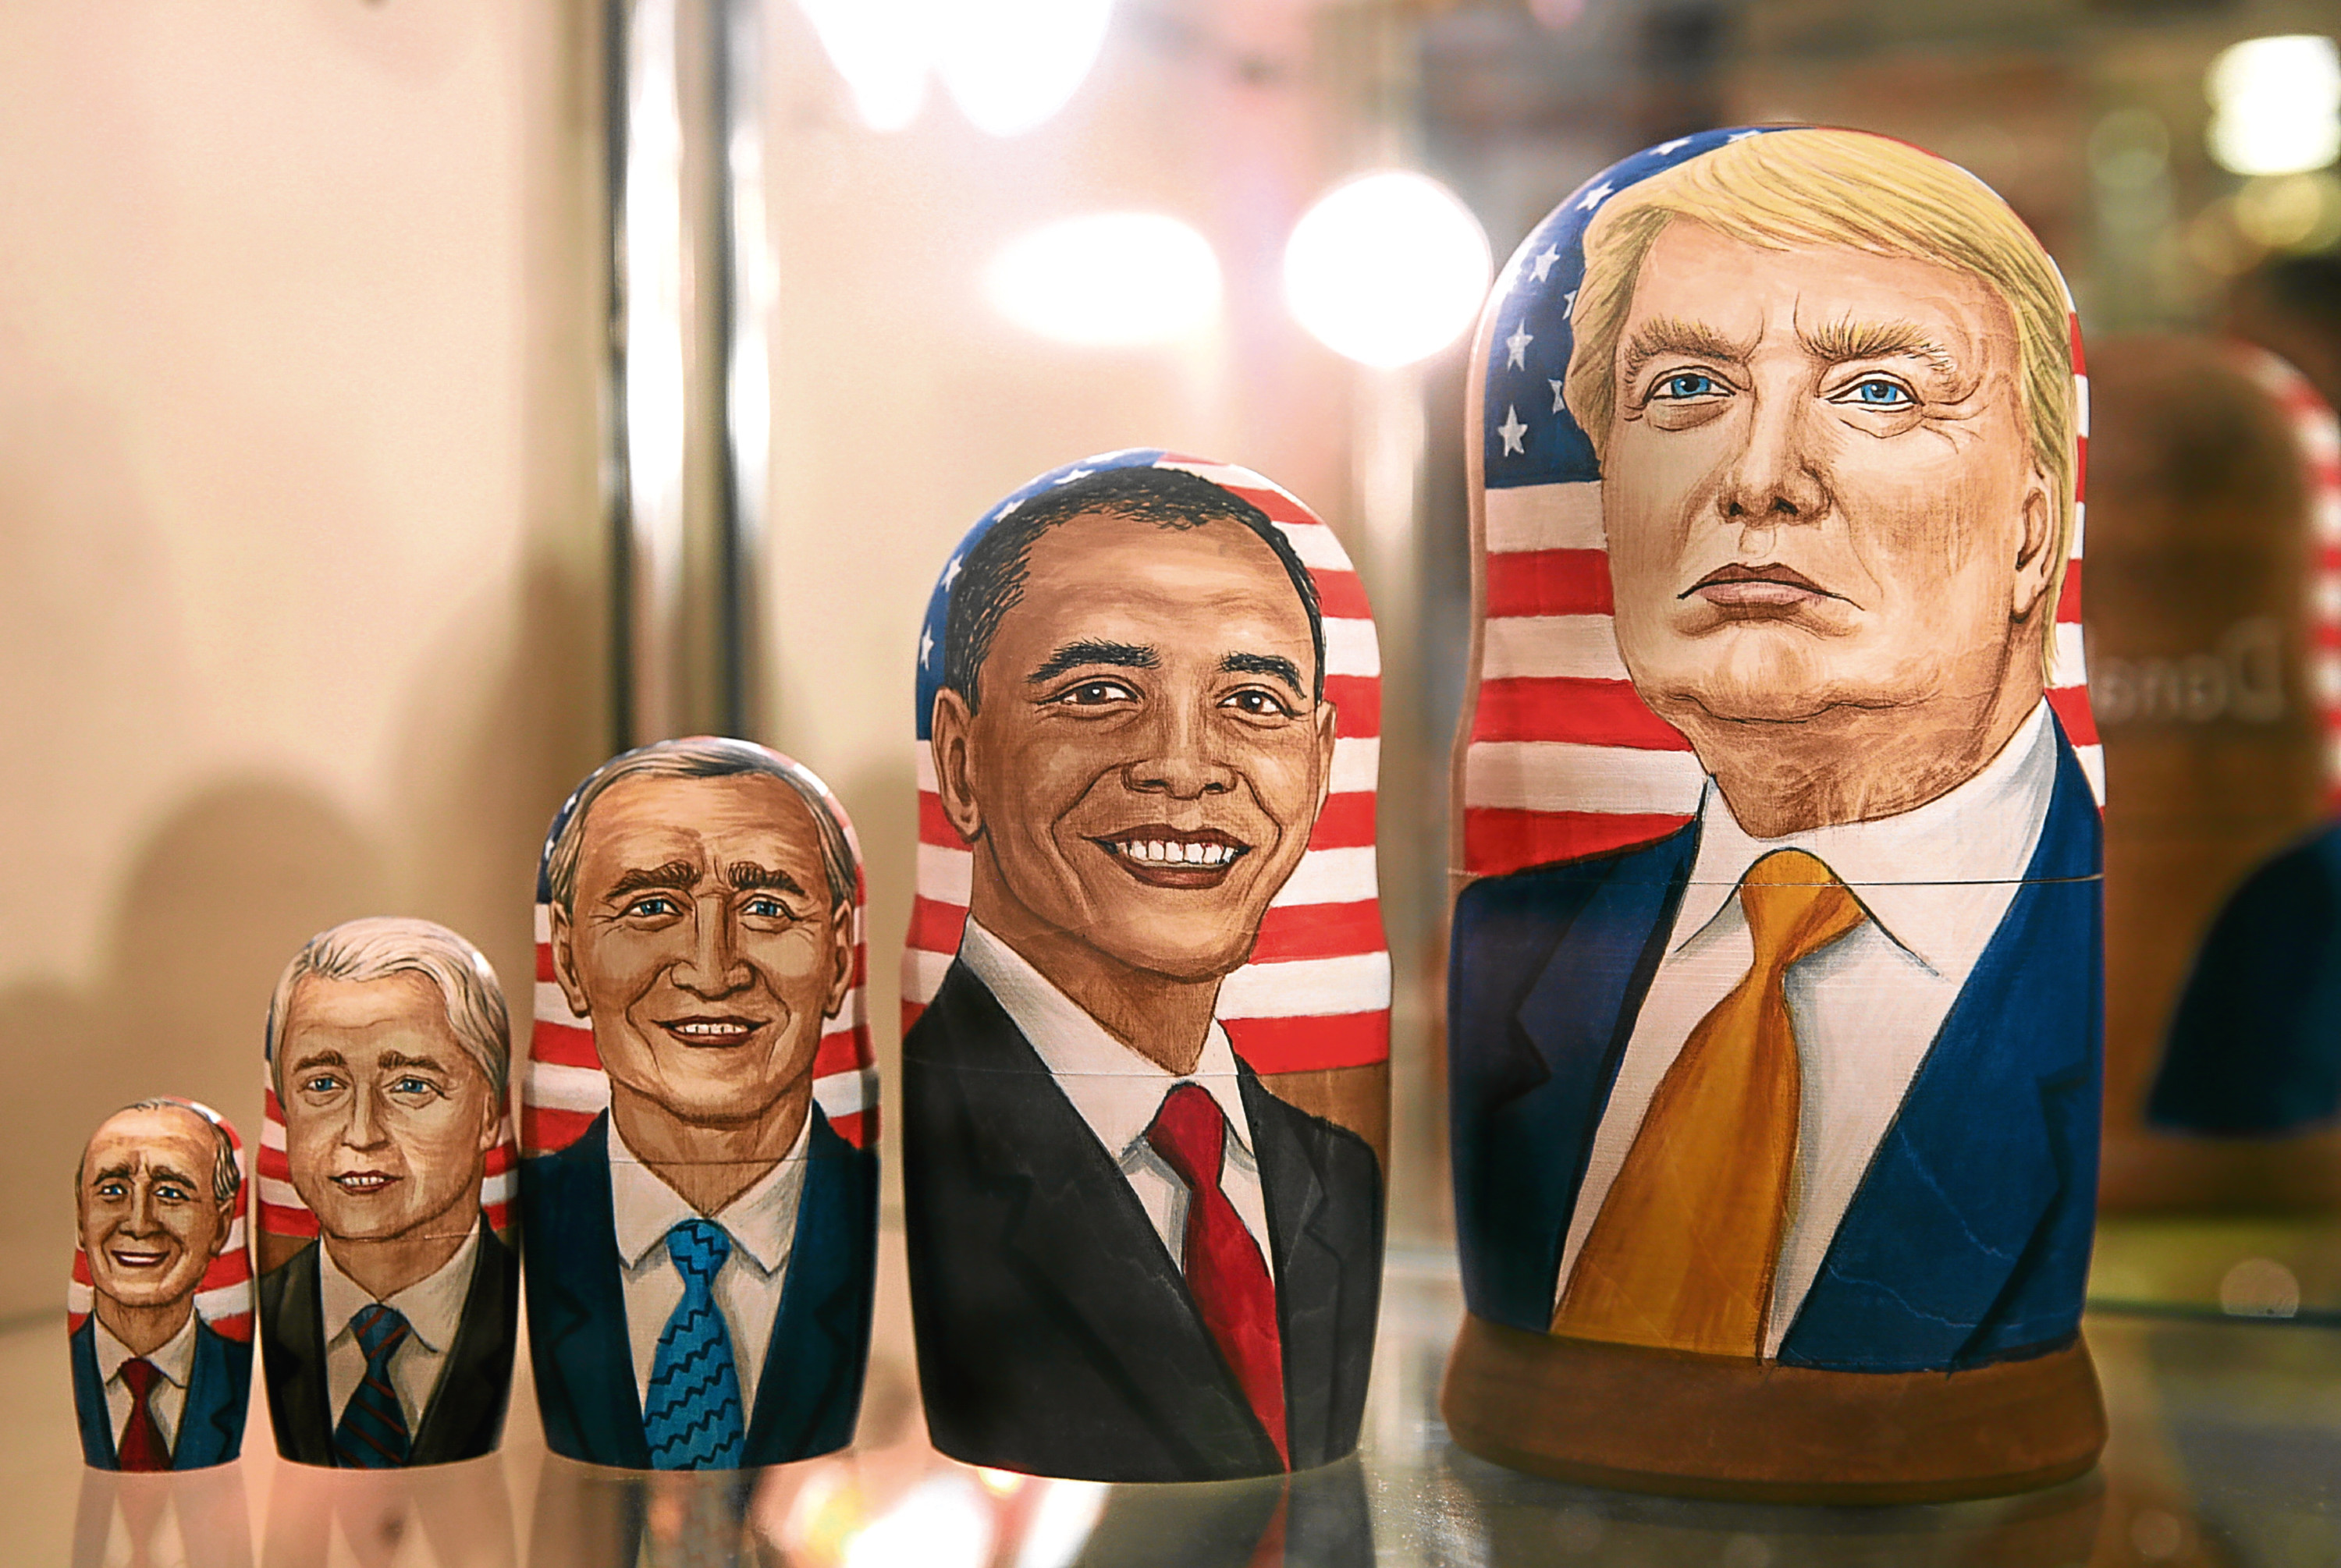 Russian dolls in the likeness of US presidents (Mikhail PochuyevTASS via Getty Images)